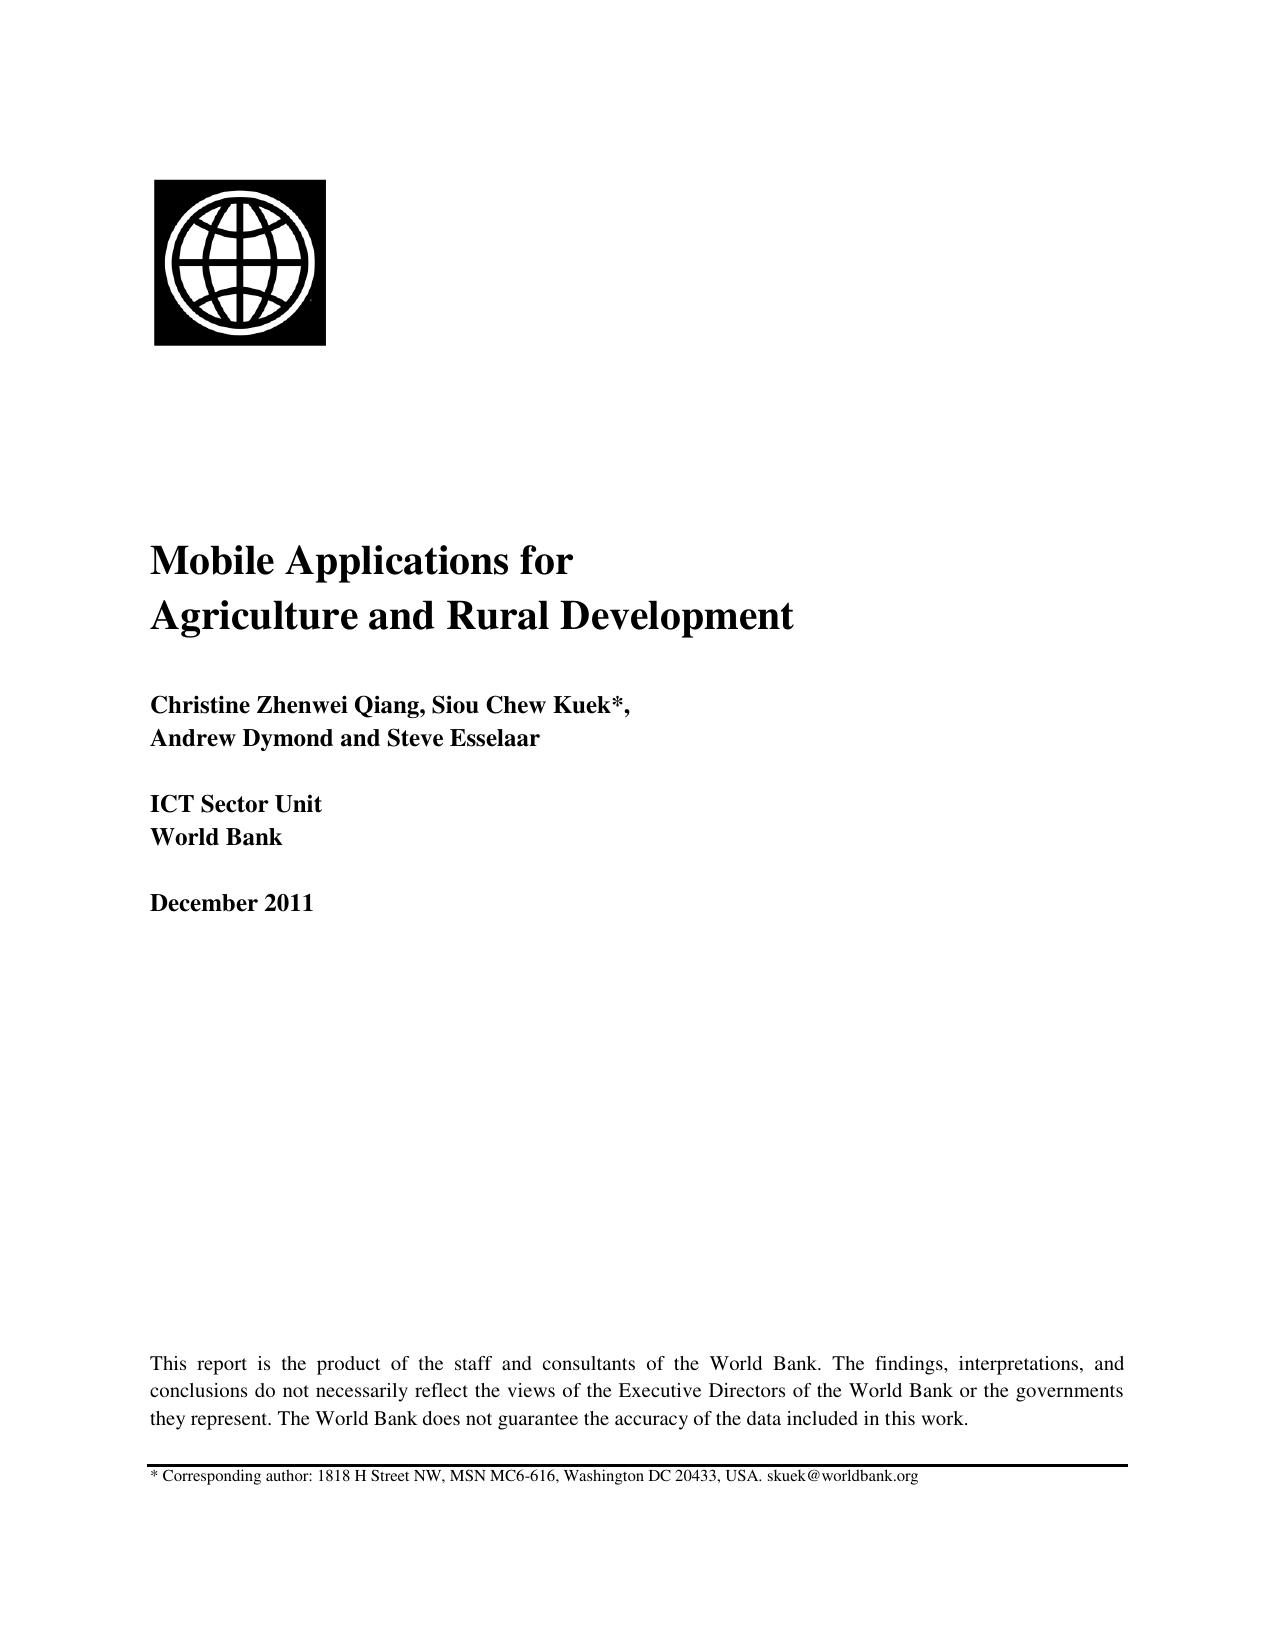 Mobile Applications for Agriculture and Rural Development 2011